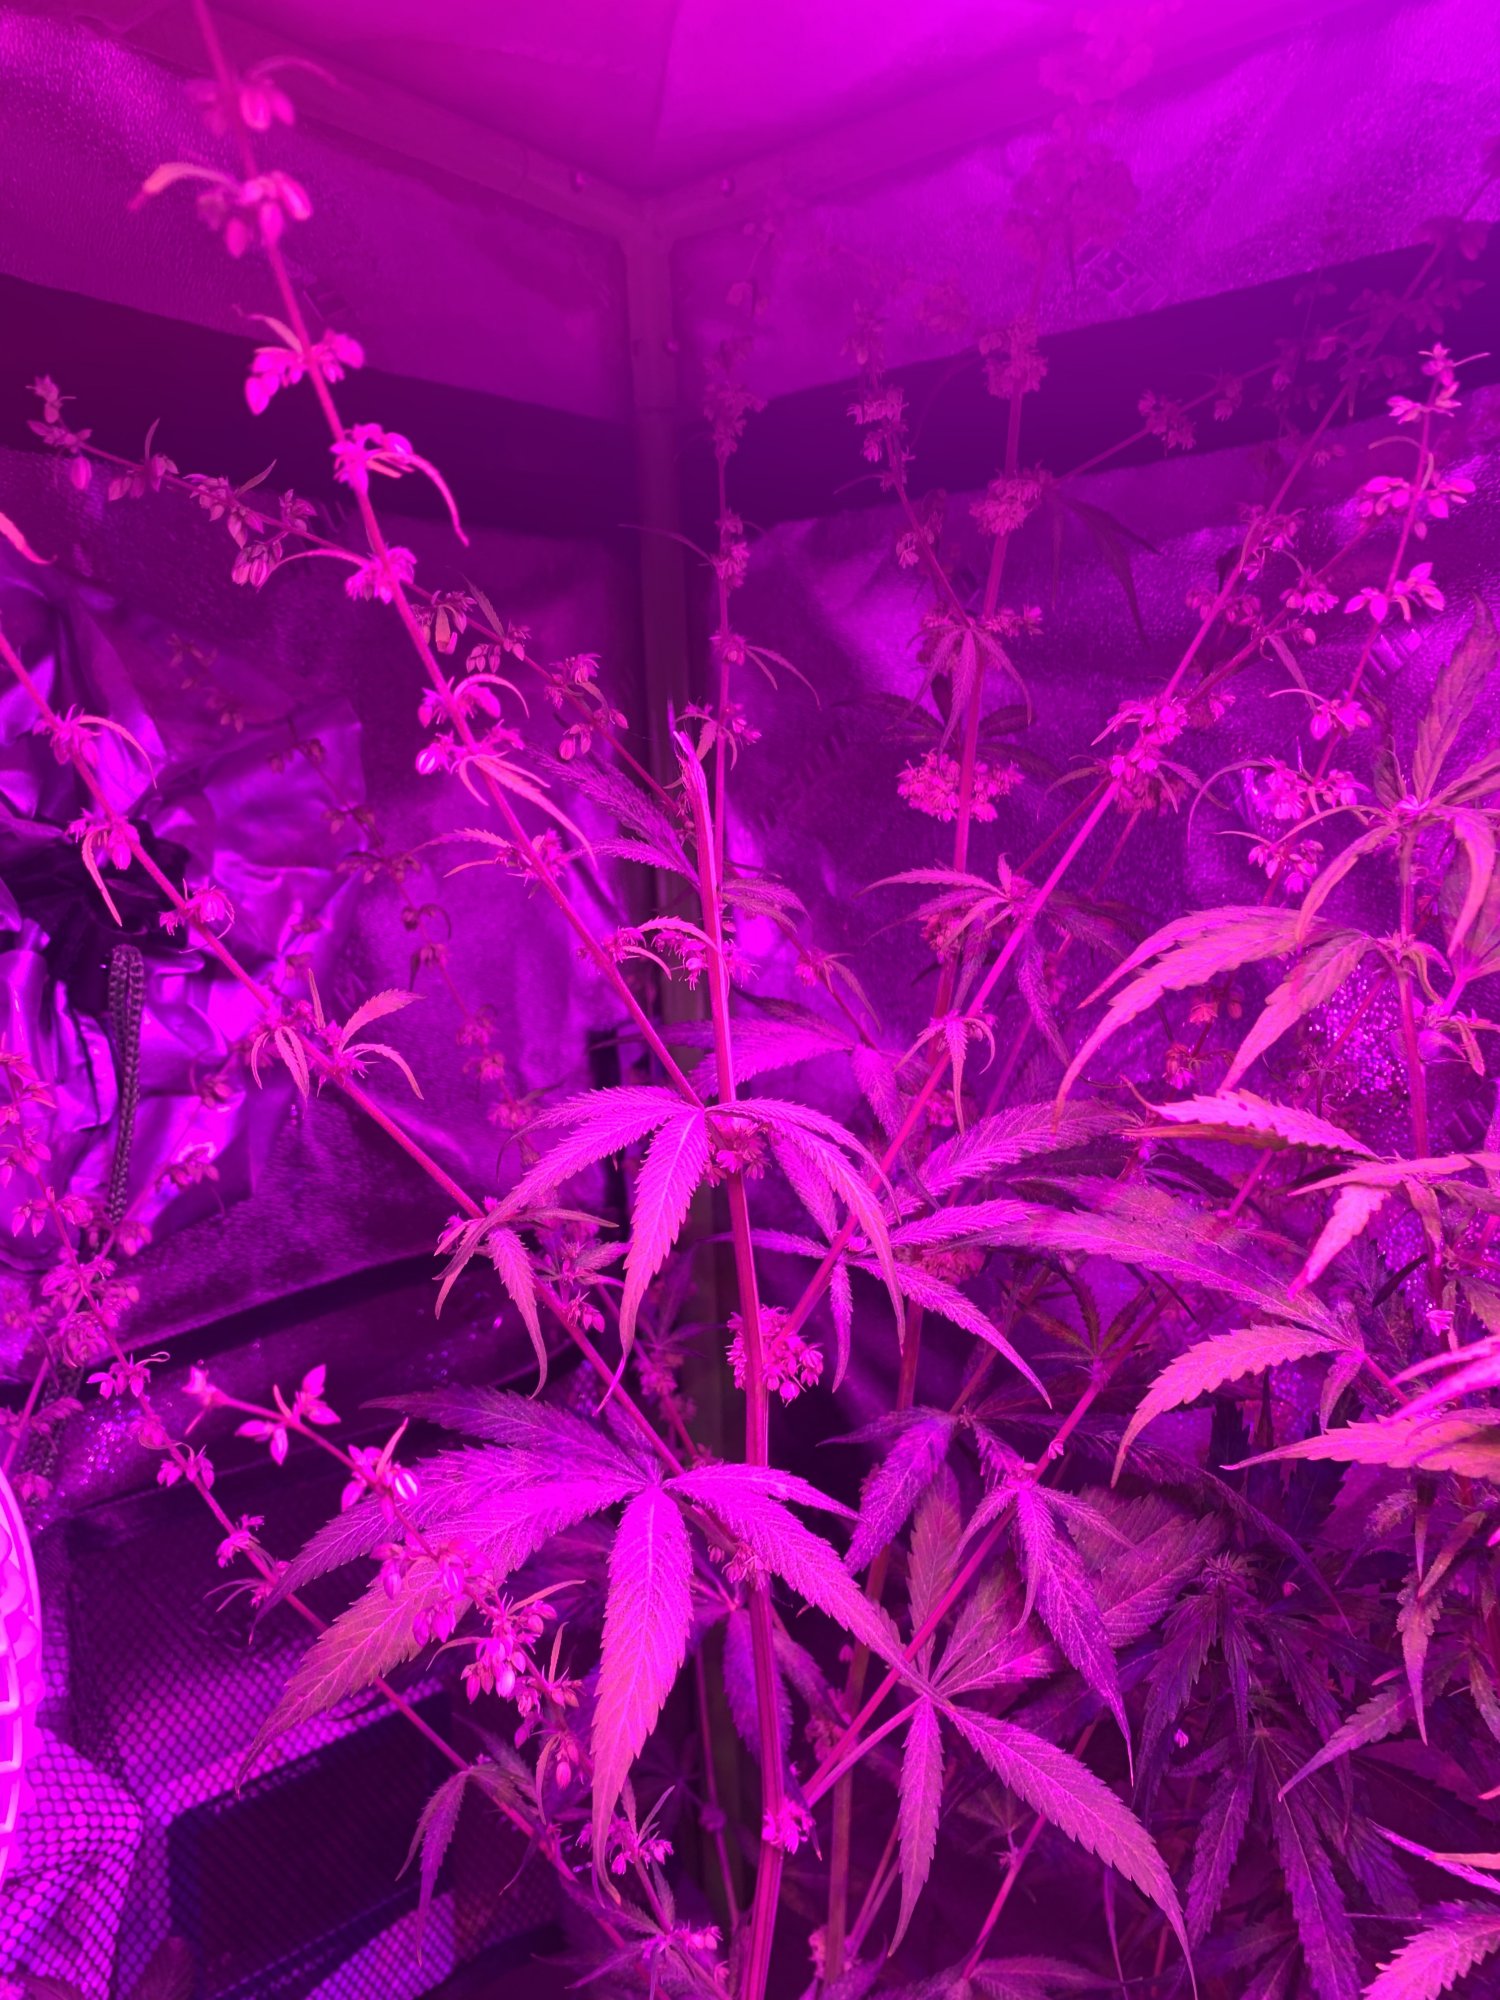 I need real help with breeding autoflower i need more information as well